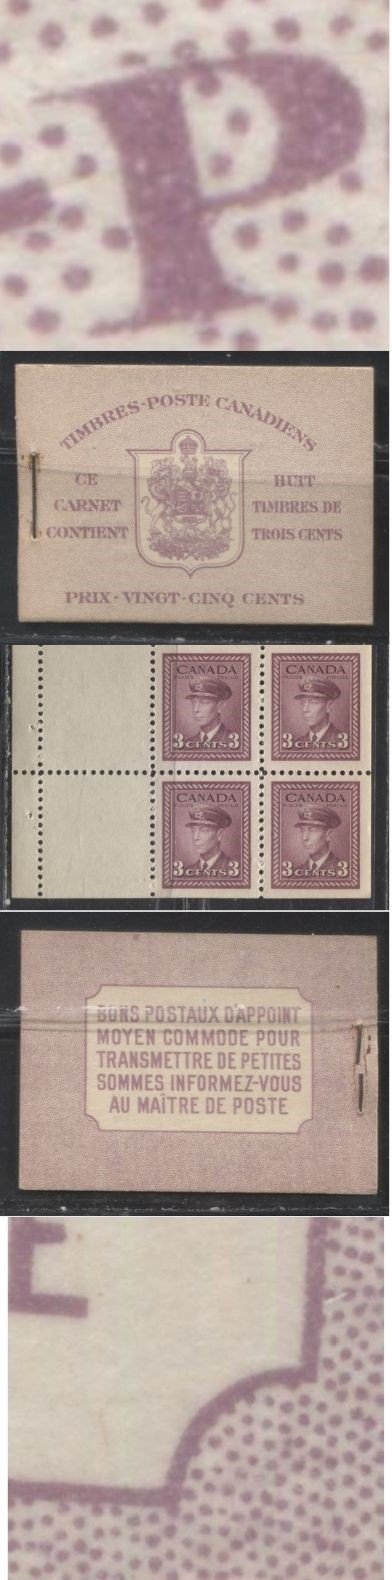 Lot 66 Canada #BK35b 1942-1949 War Issue,Type II,  Complete 25¢ French Booklet, 2 Panes of 3c Rosy Plum, Horizontal Ribbed Paper, Harris Front Cover Type IIo, Back Cover Type Dii, 7c and 6c Airmail Rate Page